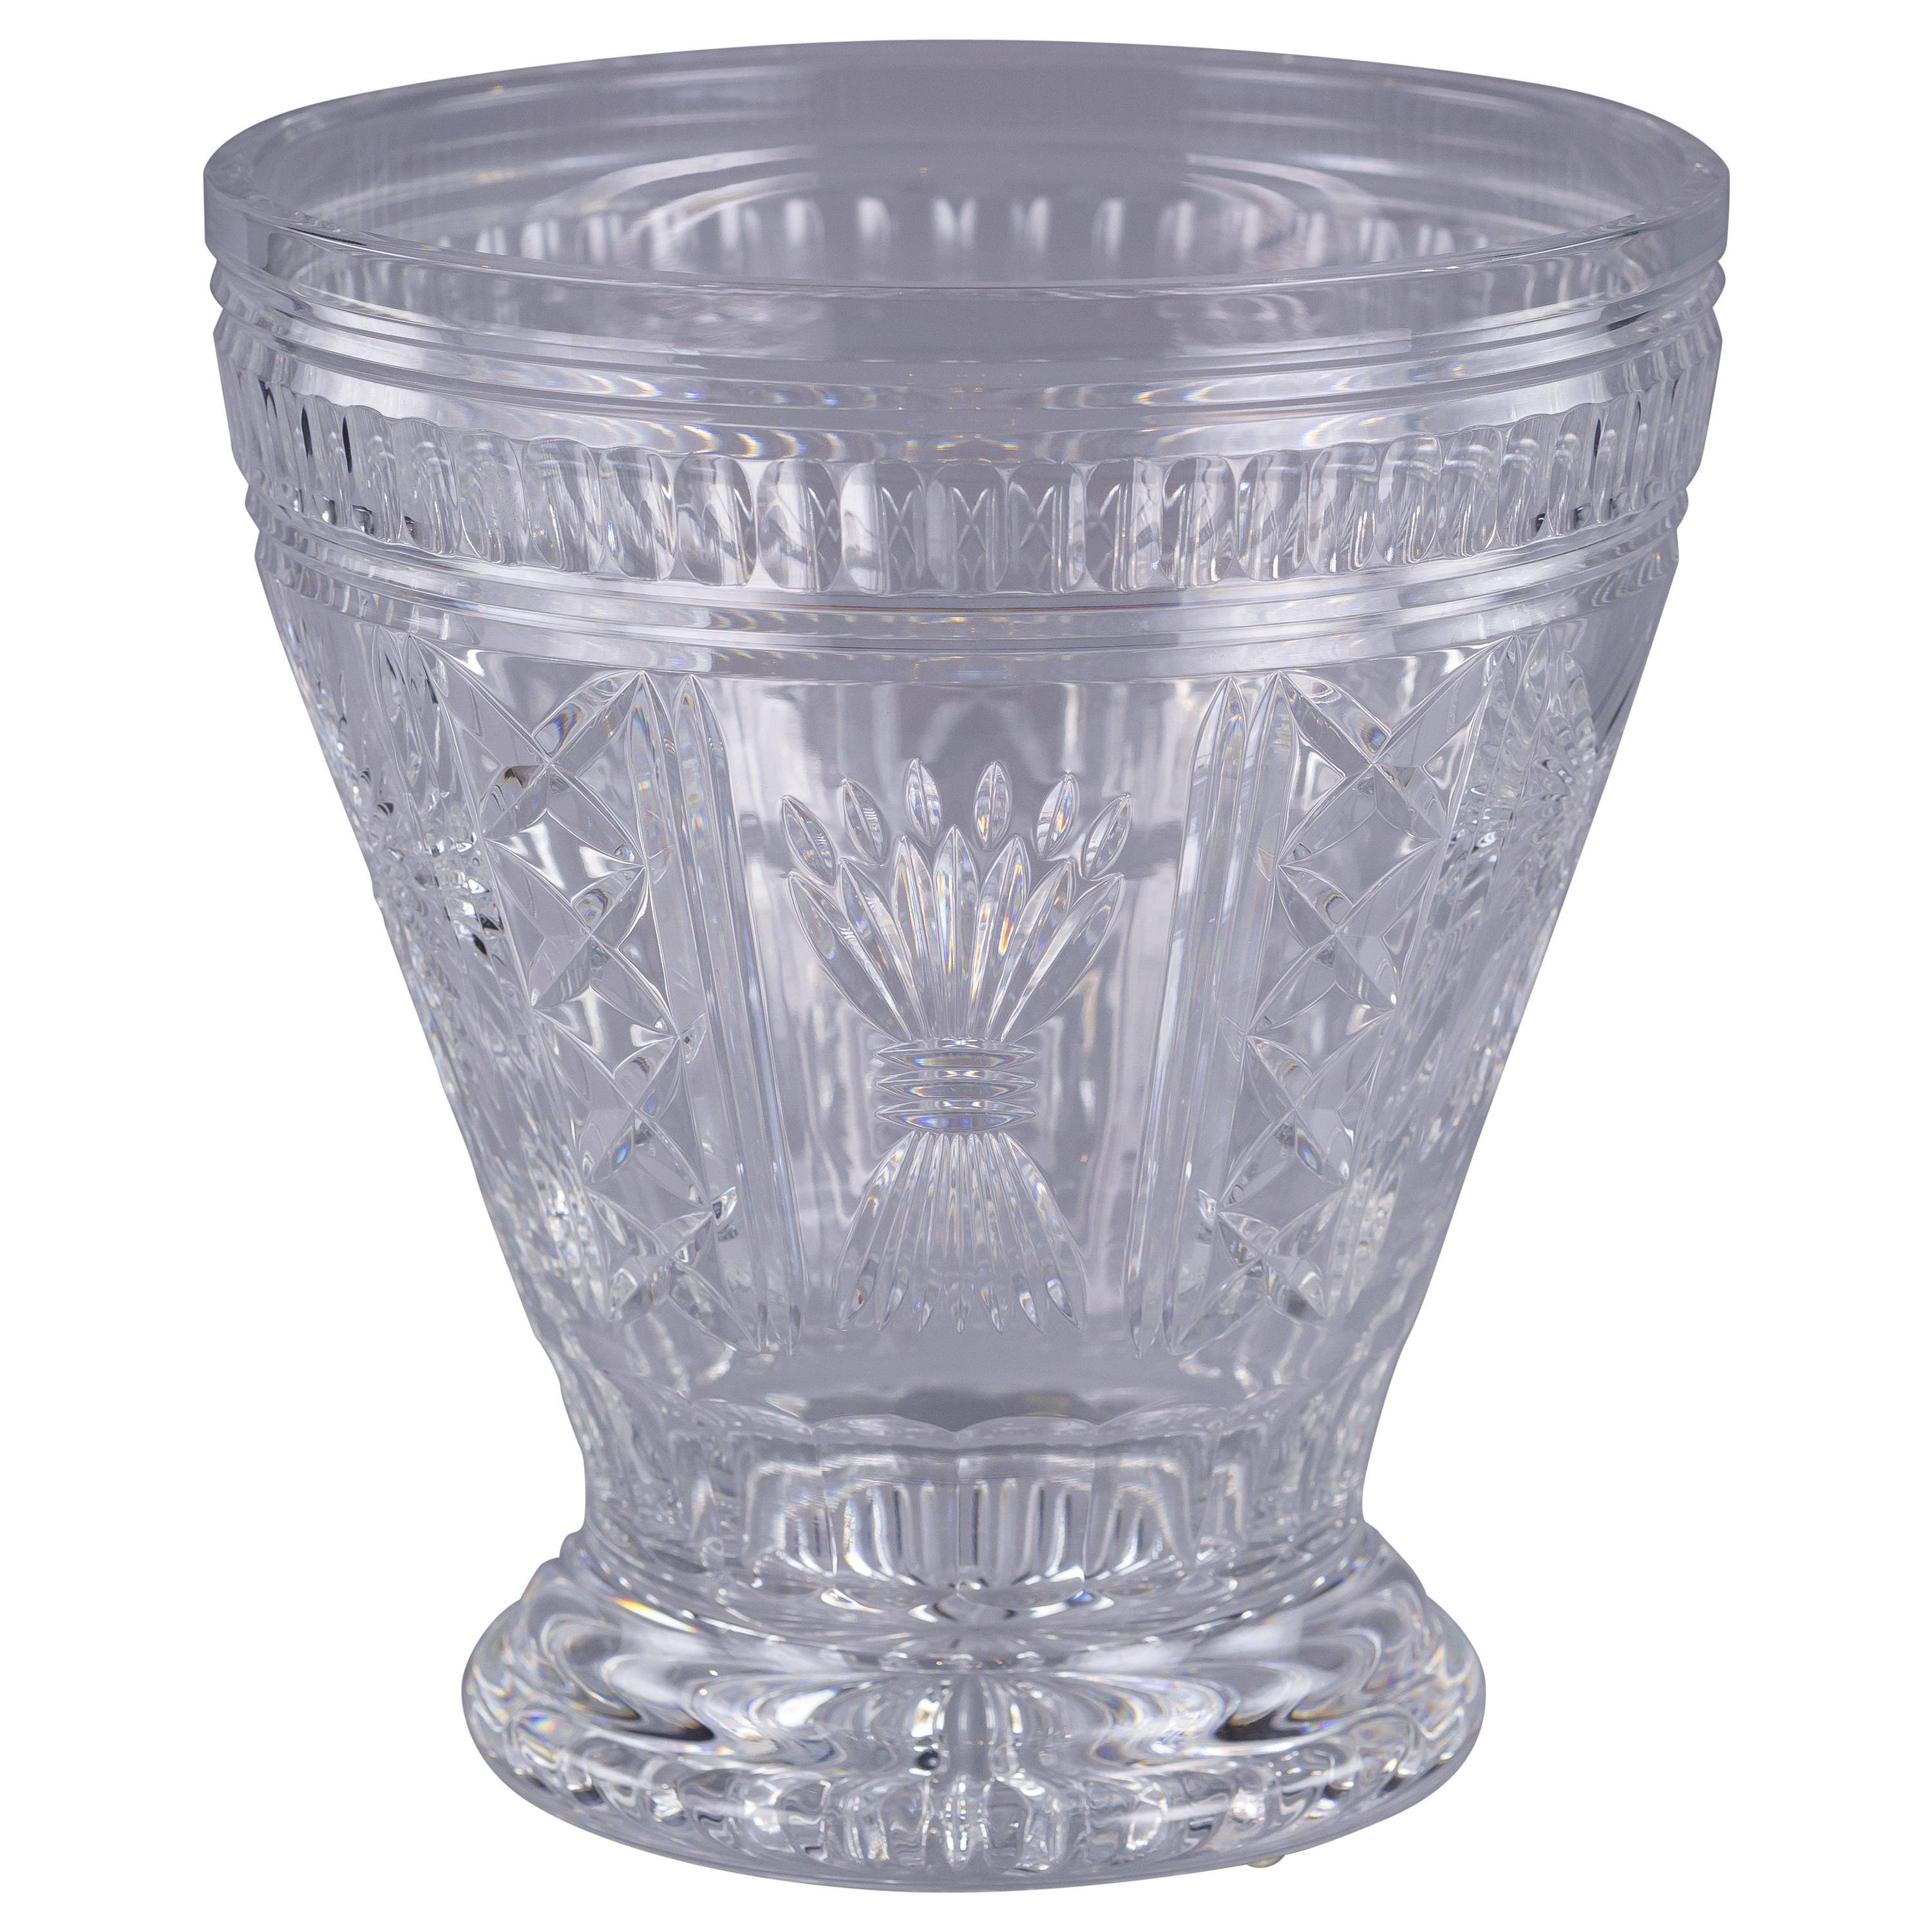 Large Waterford Cut and Faceted Glass Vase, 20th Century